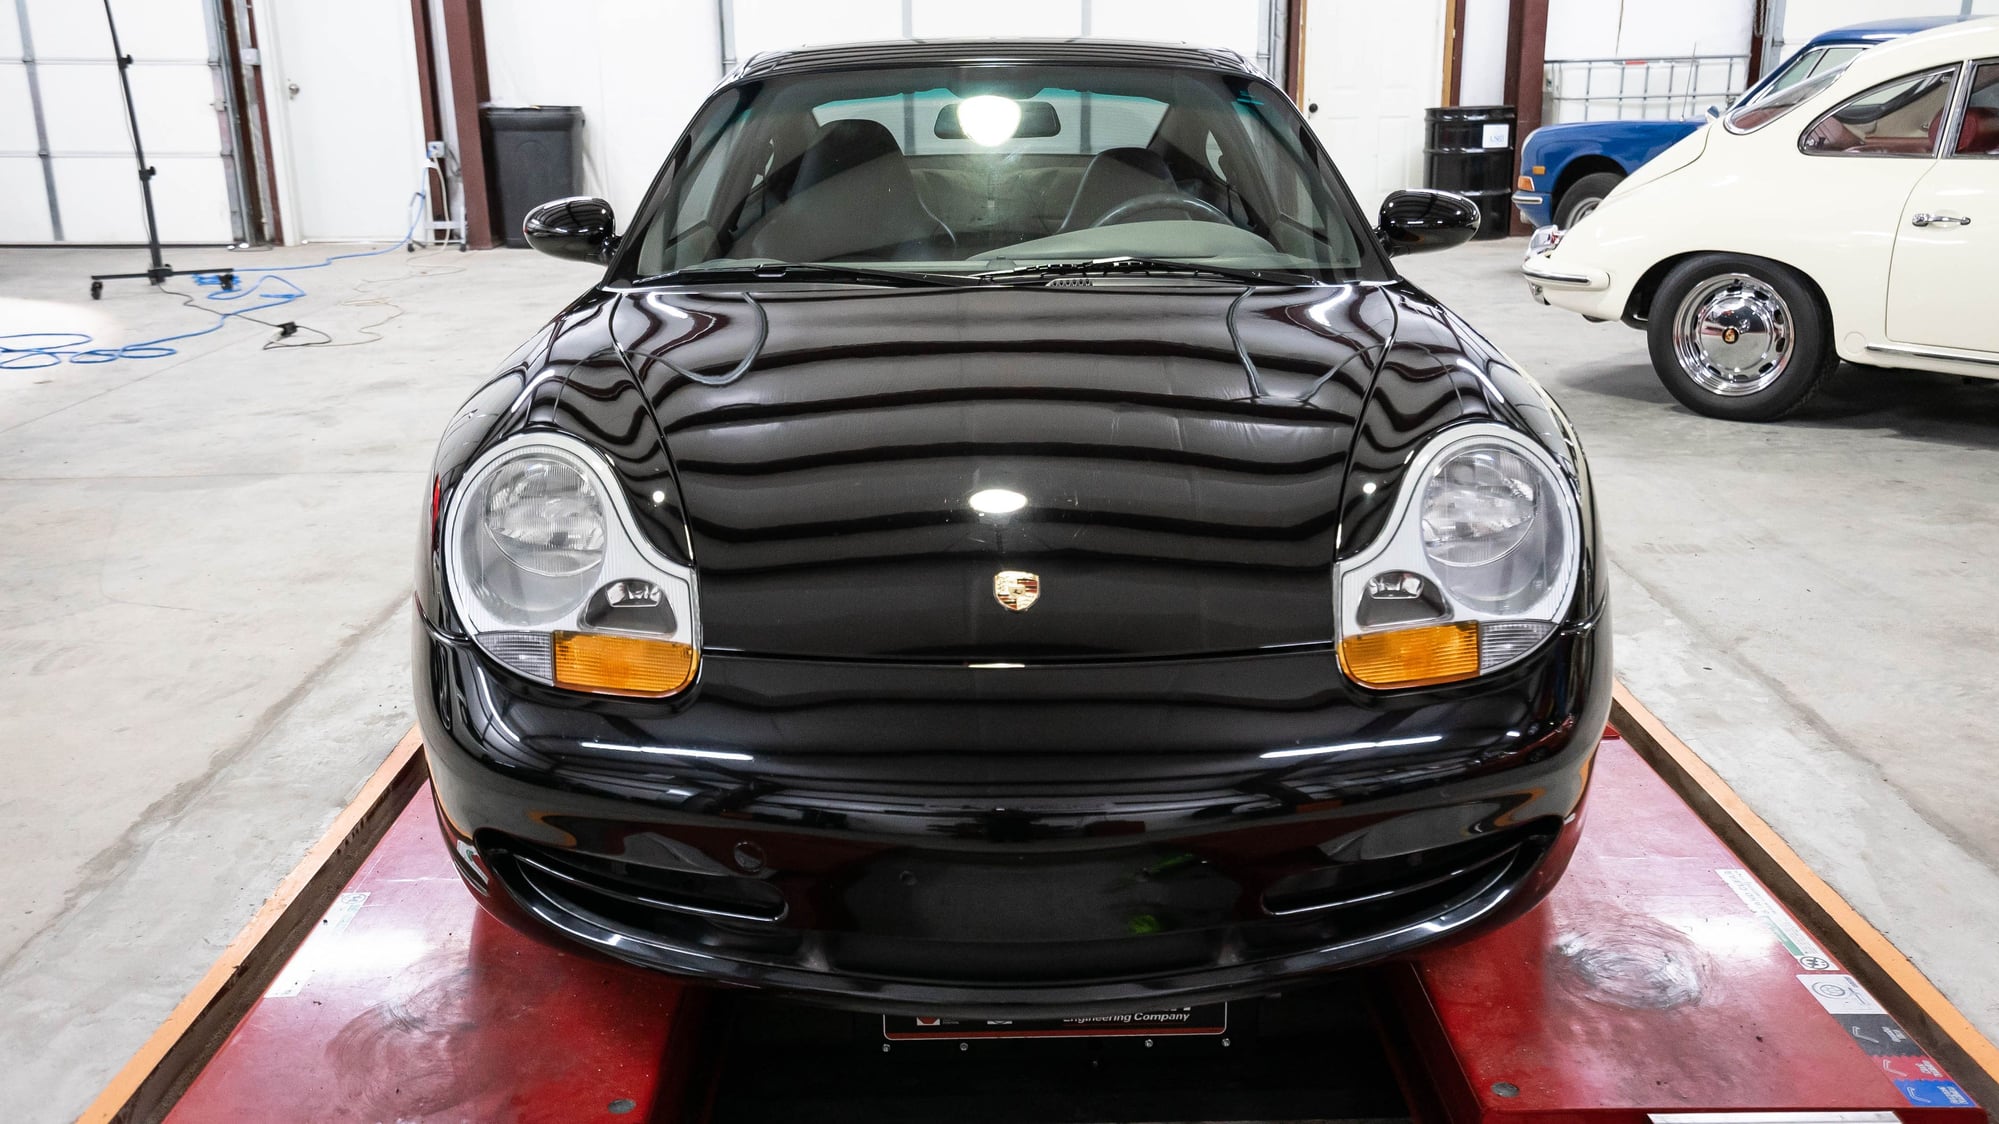 1999 Porsche 911 - 1999 Porsche 911 Carrera * LOW MILEAGE 4- OWNER CAR!! * - Used - VIN WP0AA2998XS623167 - 47,380 Miles - 6 cyl - 2WD - Manual - Coupe - Black - Mocksville, NC 27028, United States